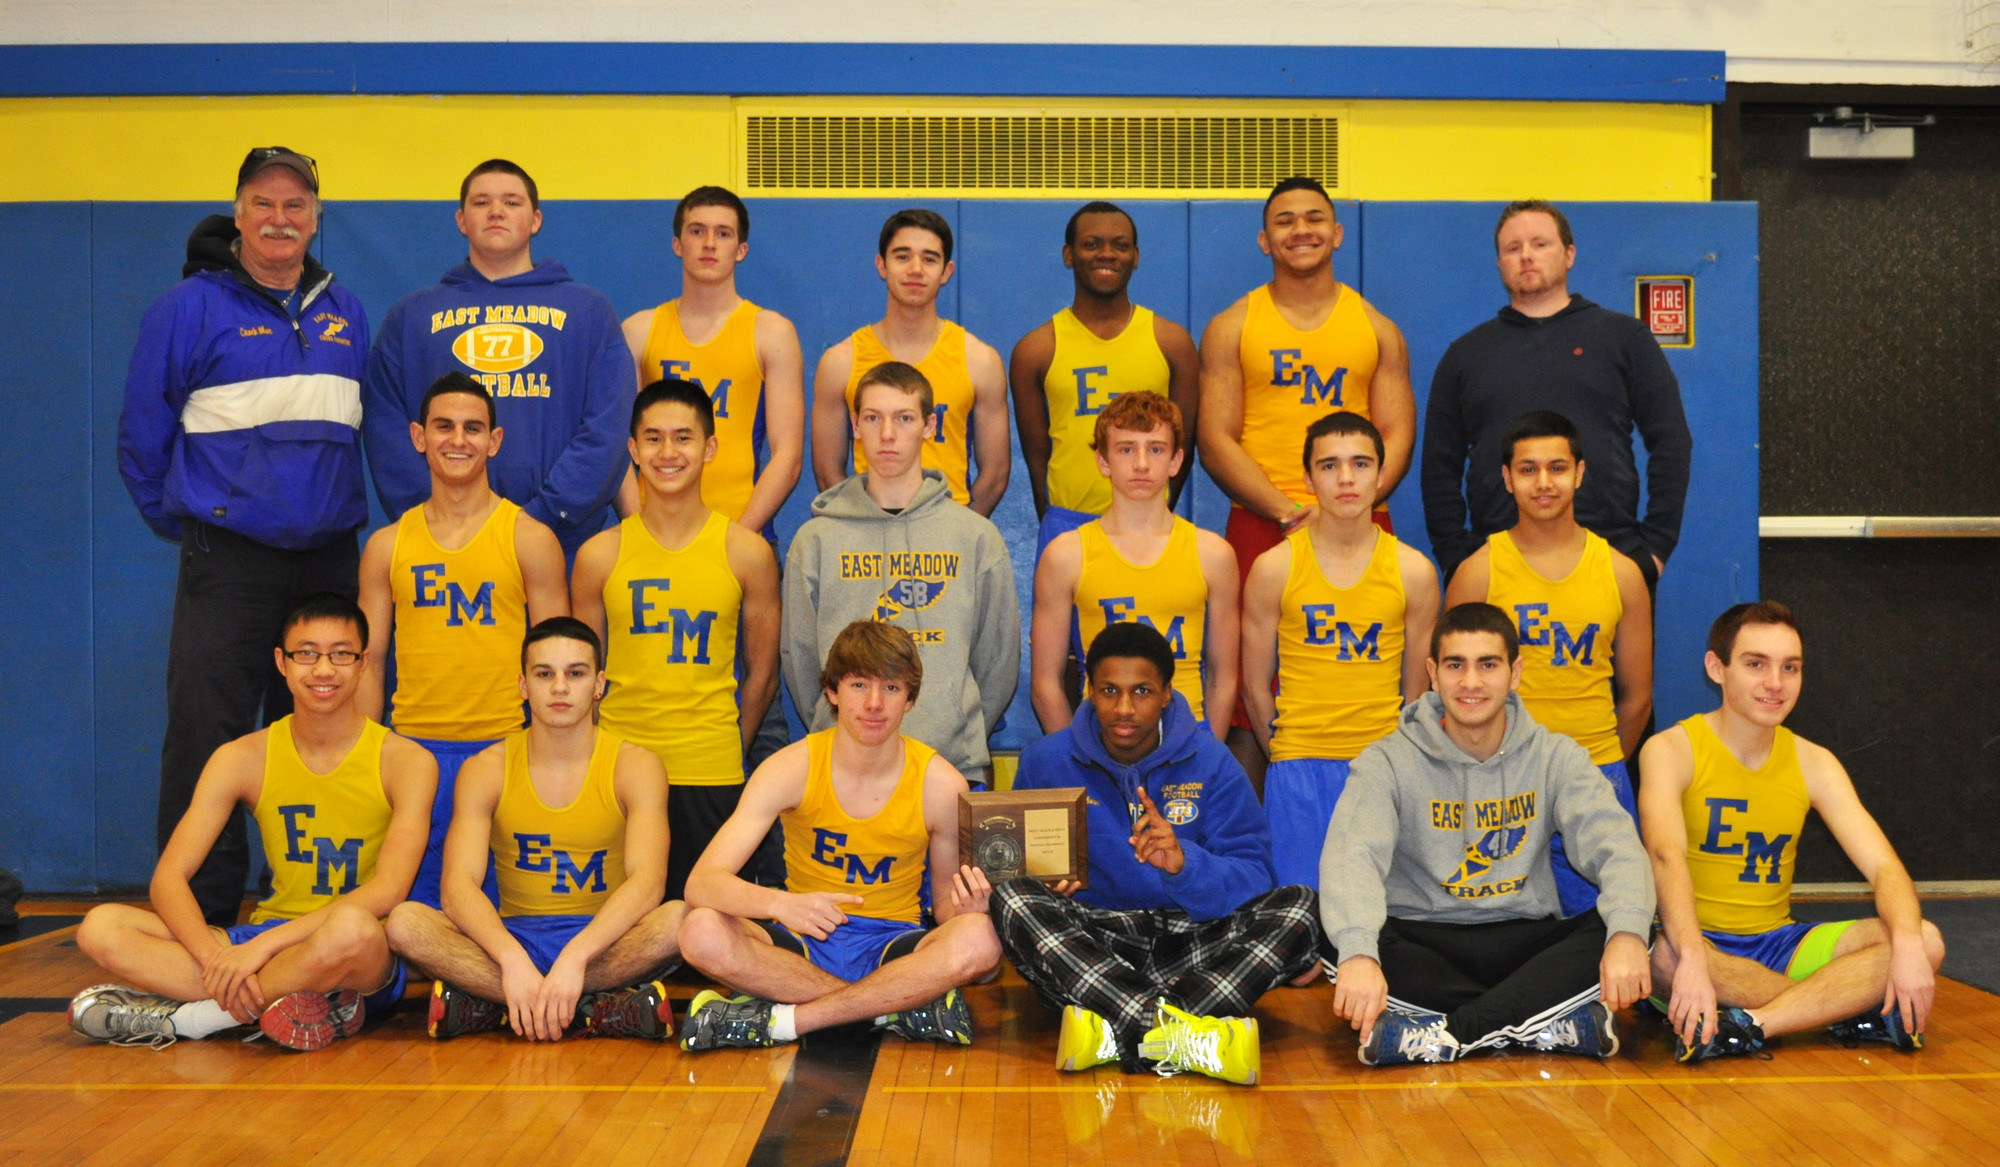 East Meadow High’s conference champion winter track team, at top left, coach Jim McGlynn, Matthew Mascia, Joe Puciloski, Michael Walsh, Jay Robinson, Chika Ewulu, coach Michael Ringhauser, middle row, from left, Prabhnoor Multani, Chris Delgado, Tim Euler, Jake Healy, Peter Vo, Eric Gershoff, and bottom row, from left, Alex Wong, Christian Torres, Mike Grady, Tim Gibson, Rui Cunha and Rob Barracca.    Photo by Tony Belissimo/Herald